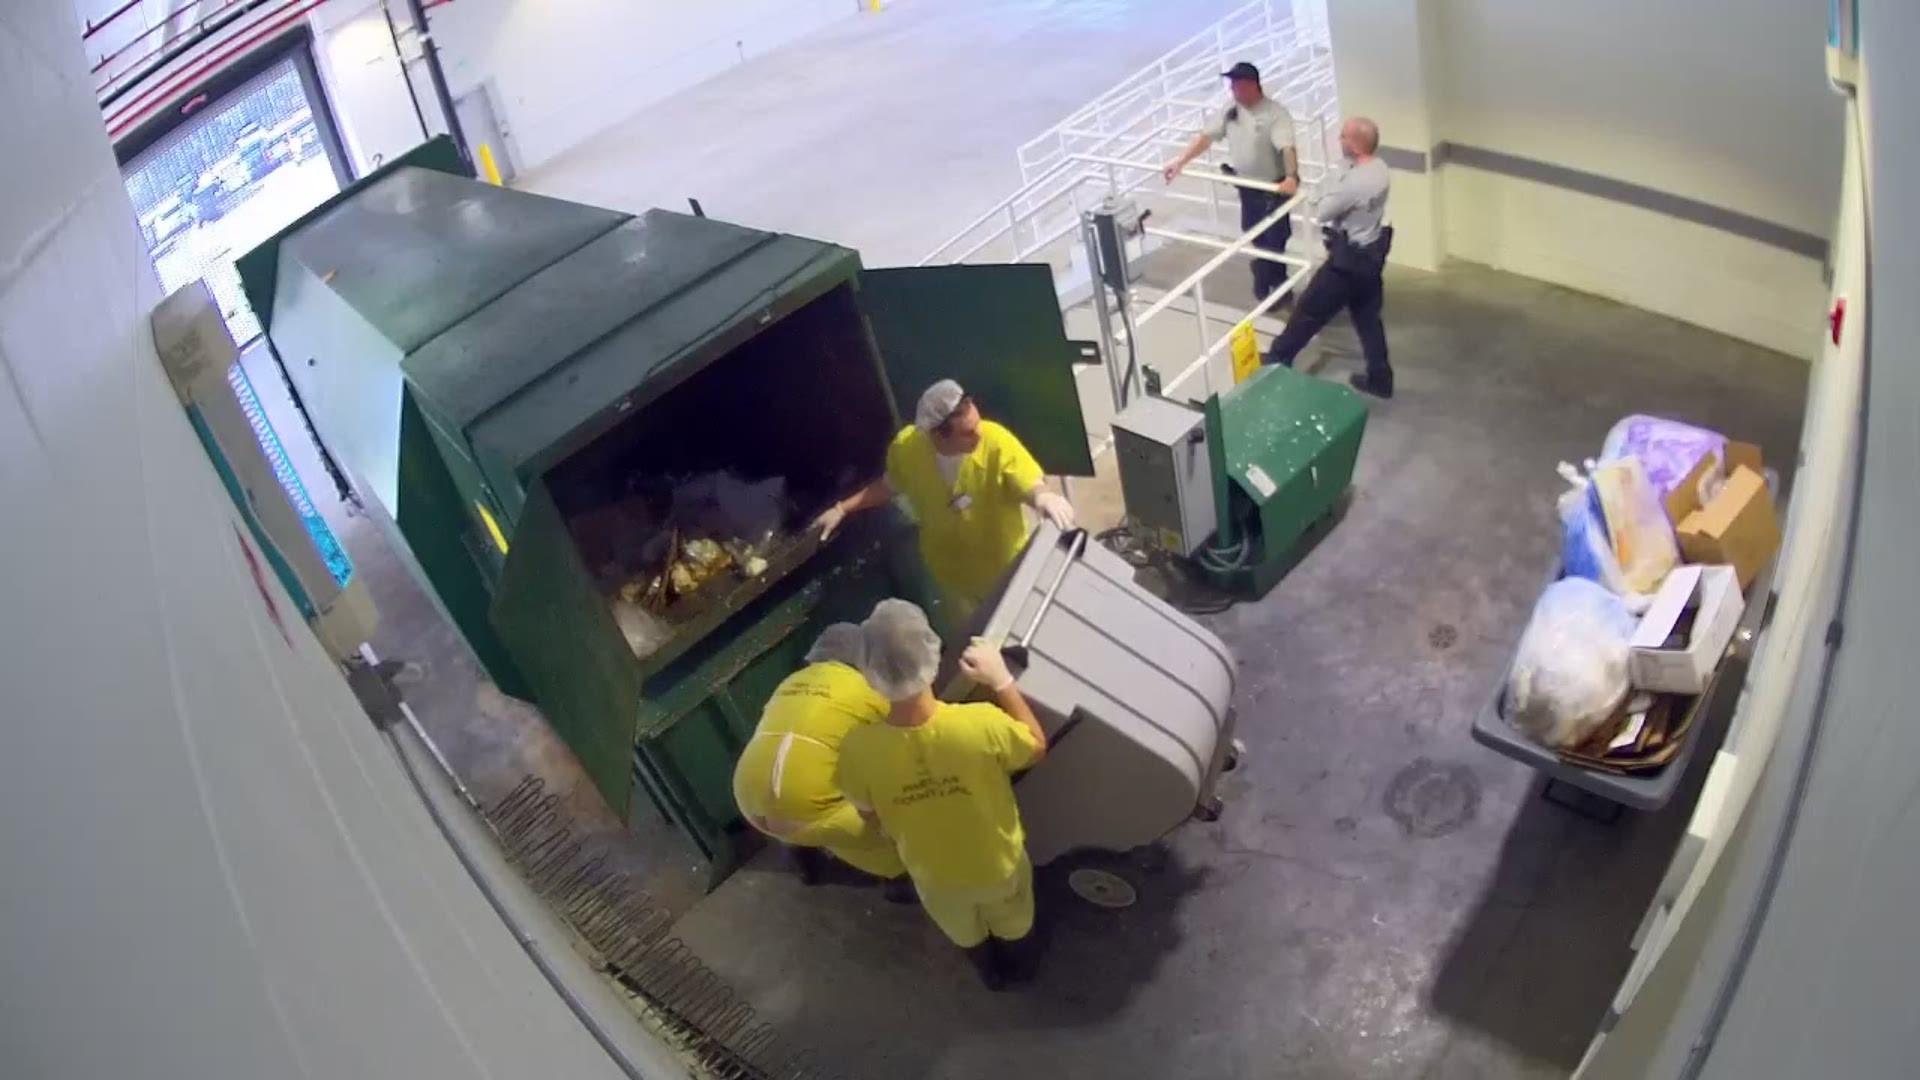 The incident started when the inmate tossed a cookie to a bird landing on top of a garbage dumpster. https://on.wtsp.com/2USY7KE